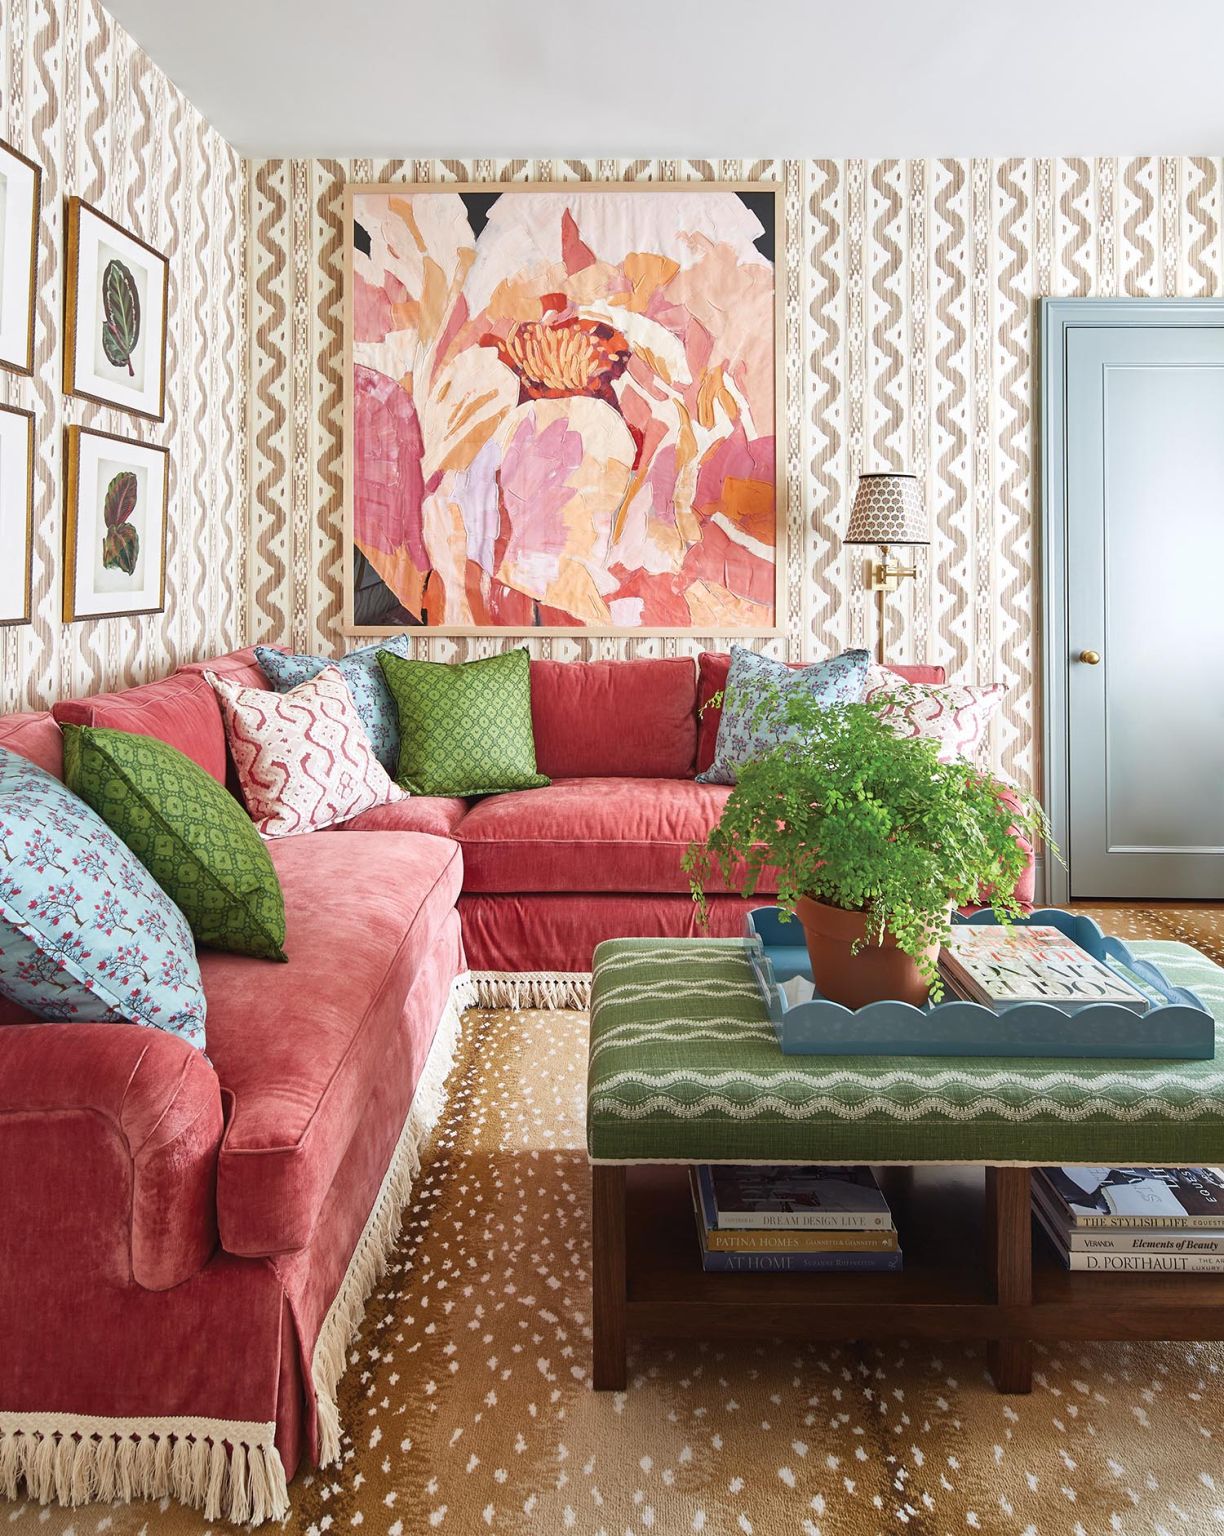 A Colorfully Sophisticated Manhattan Apartment - Flower Magazine